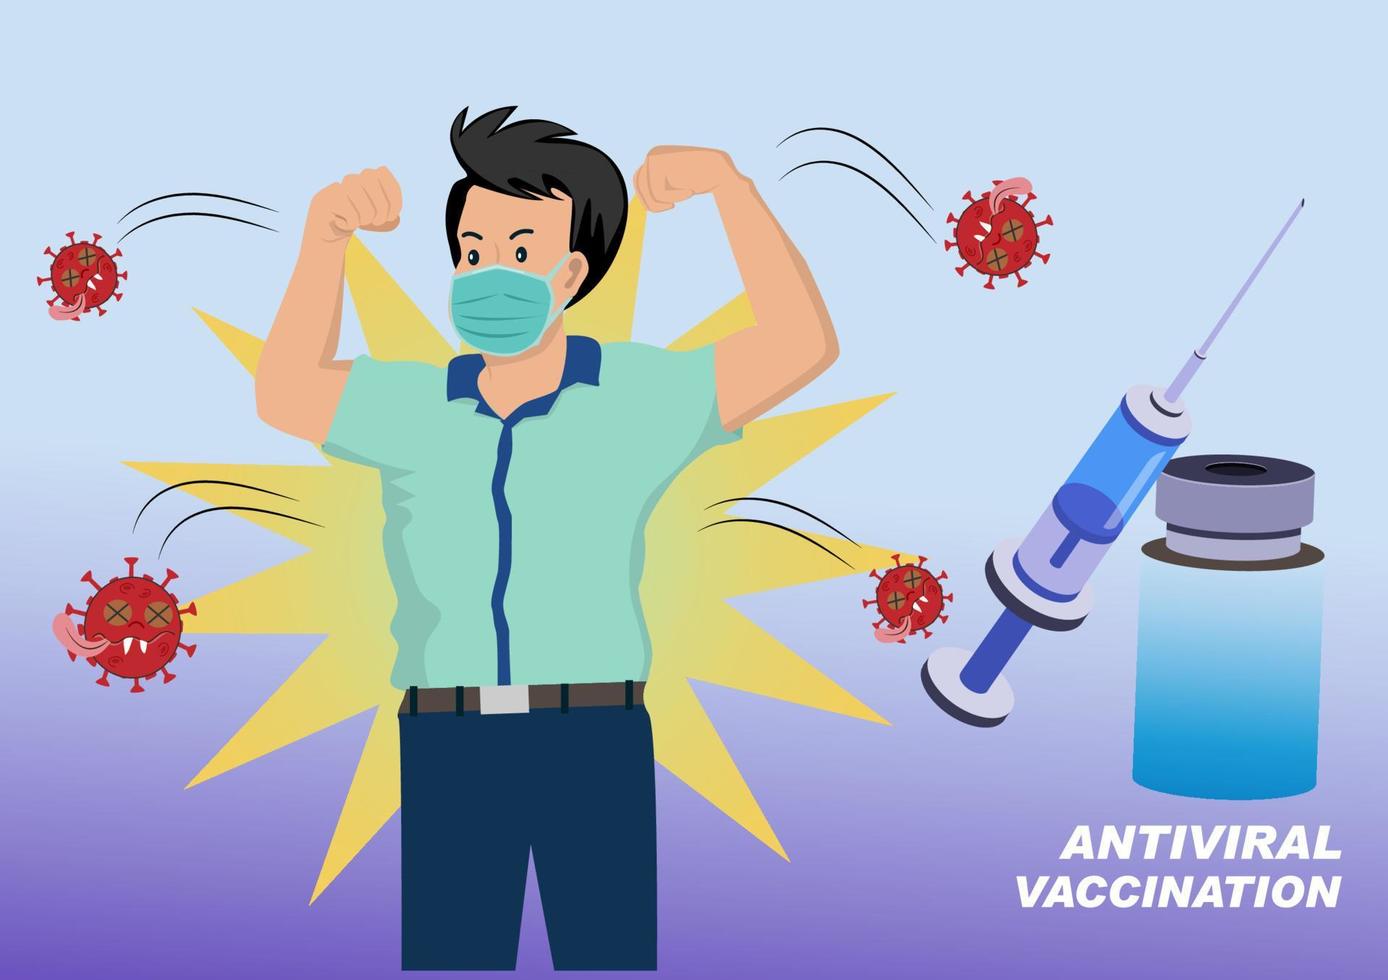 Humans or people are fighting the red corona or COVID-19 by getting a vaccine against the outbreak. Flat style cartoon illustration vector